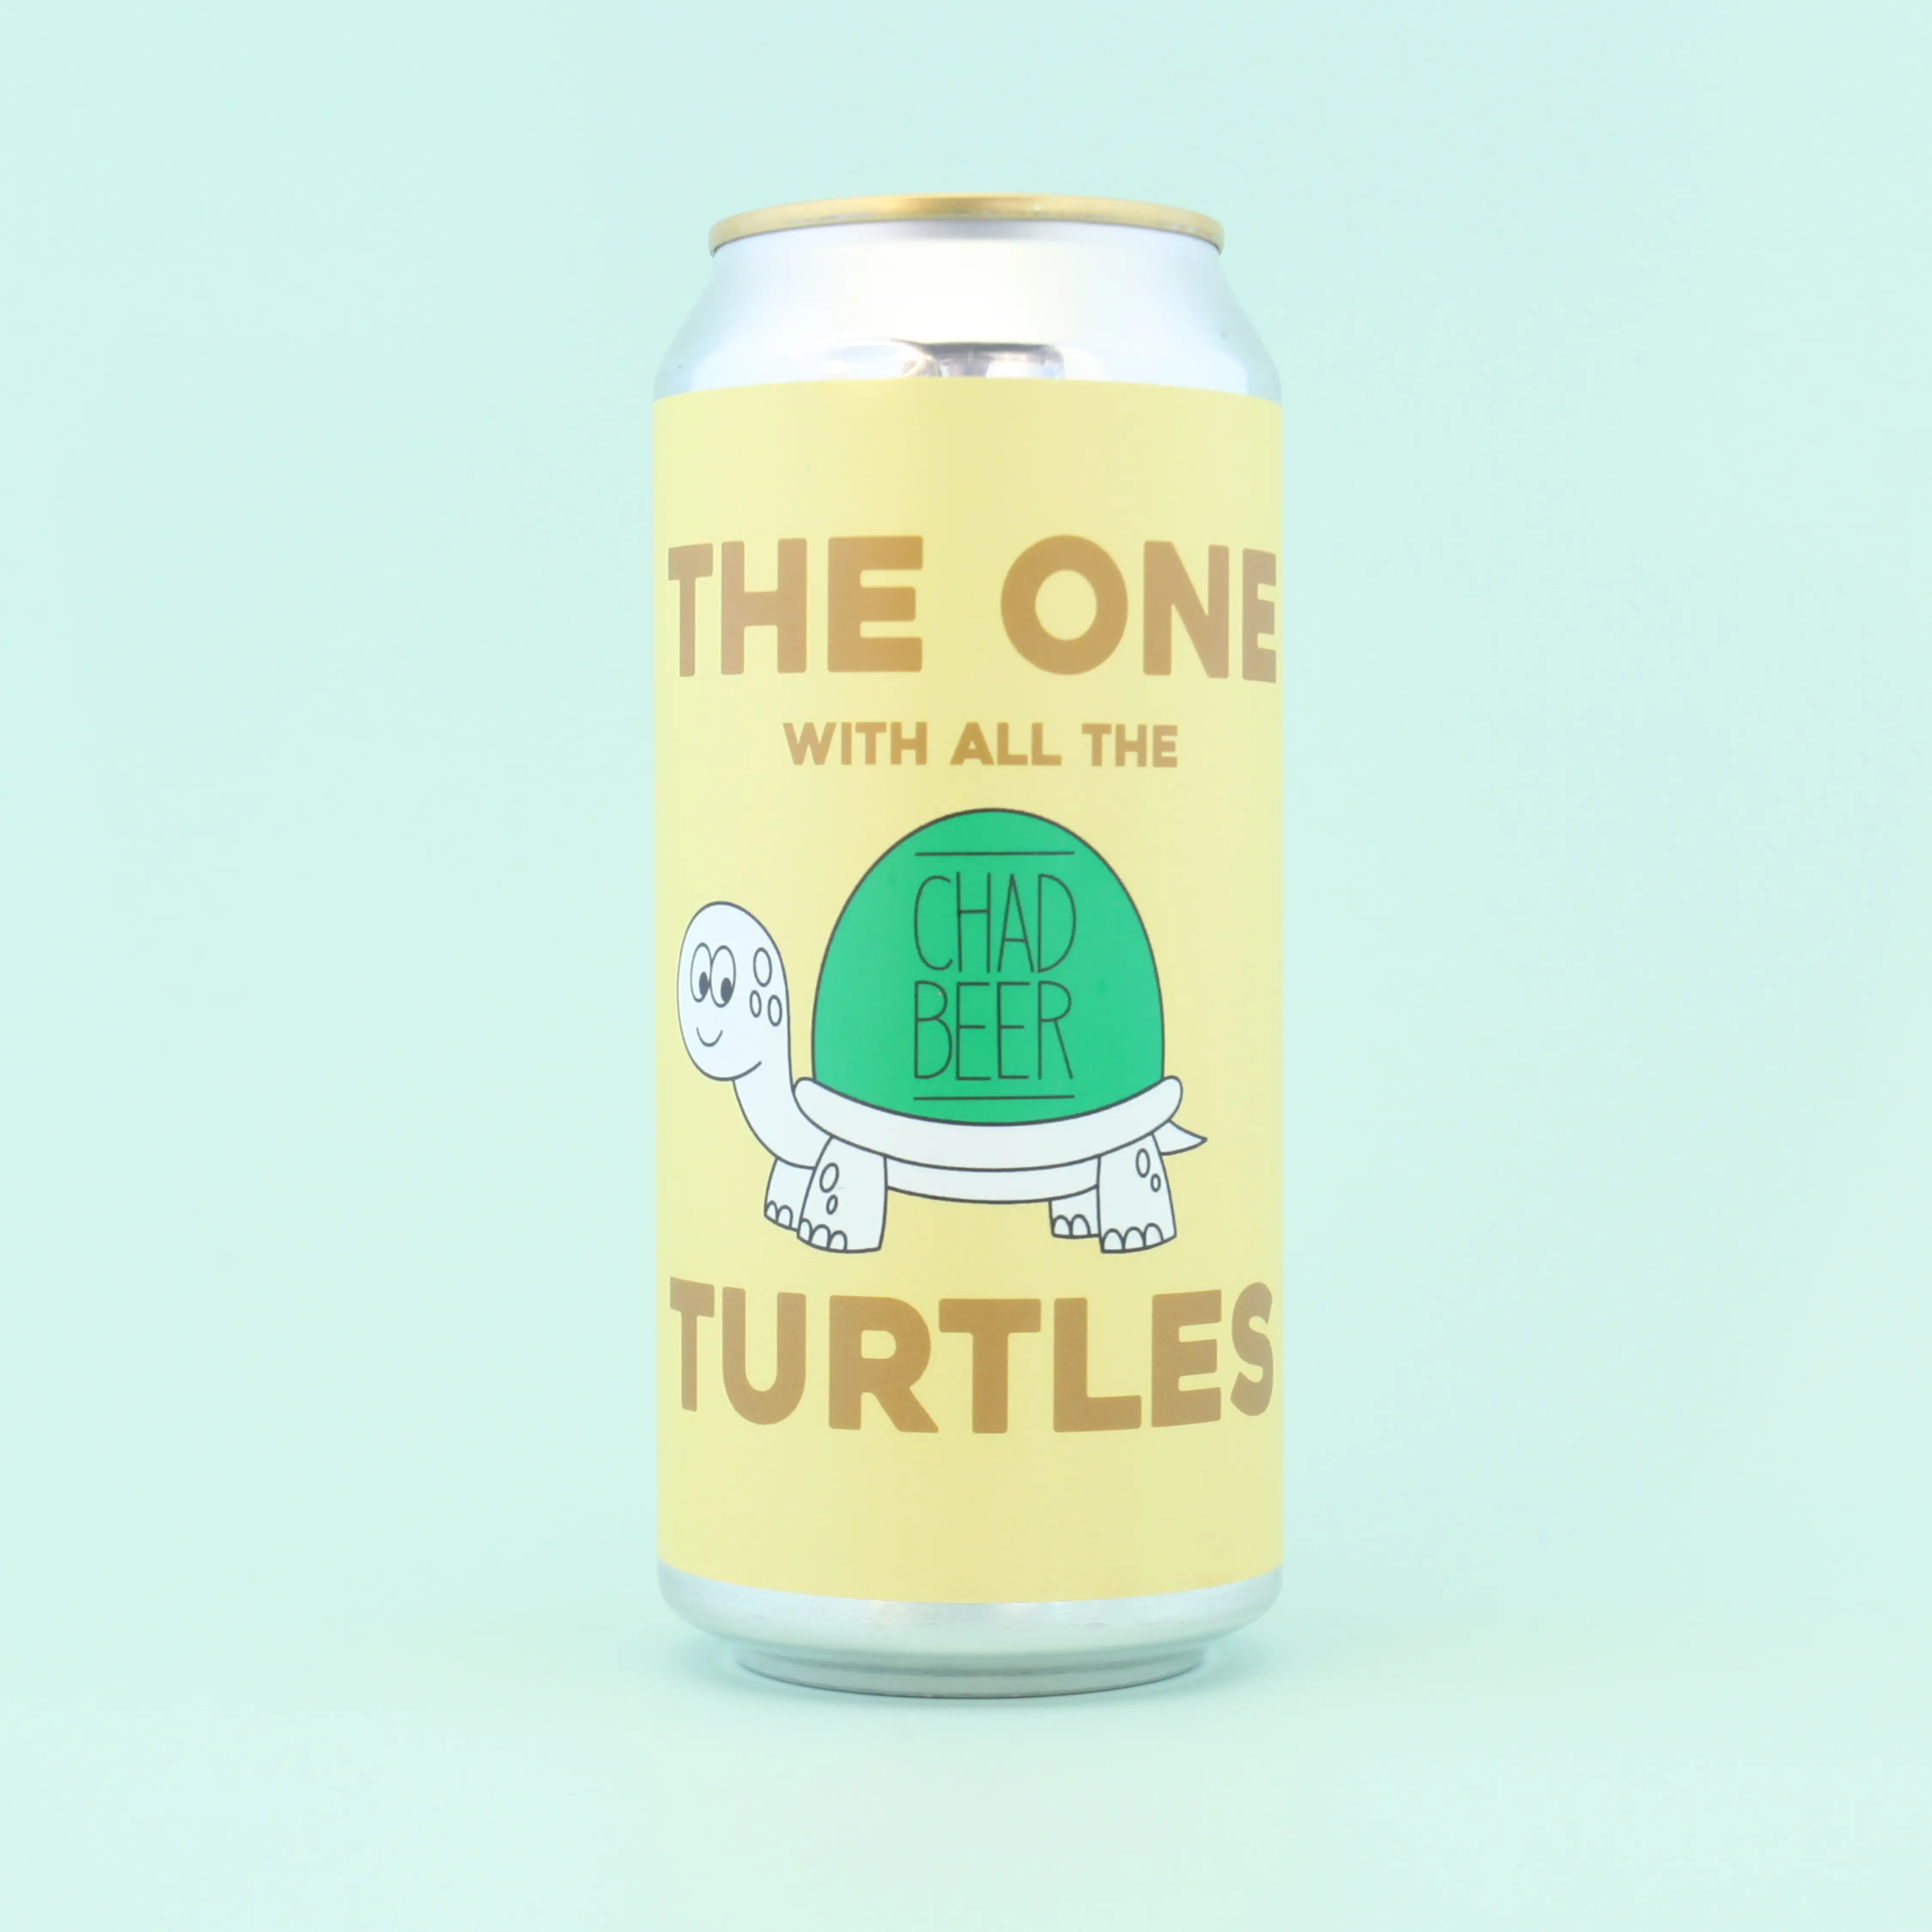 Chad Beer - The One With All The Turtles